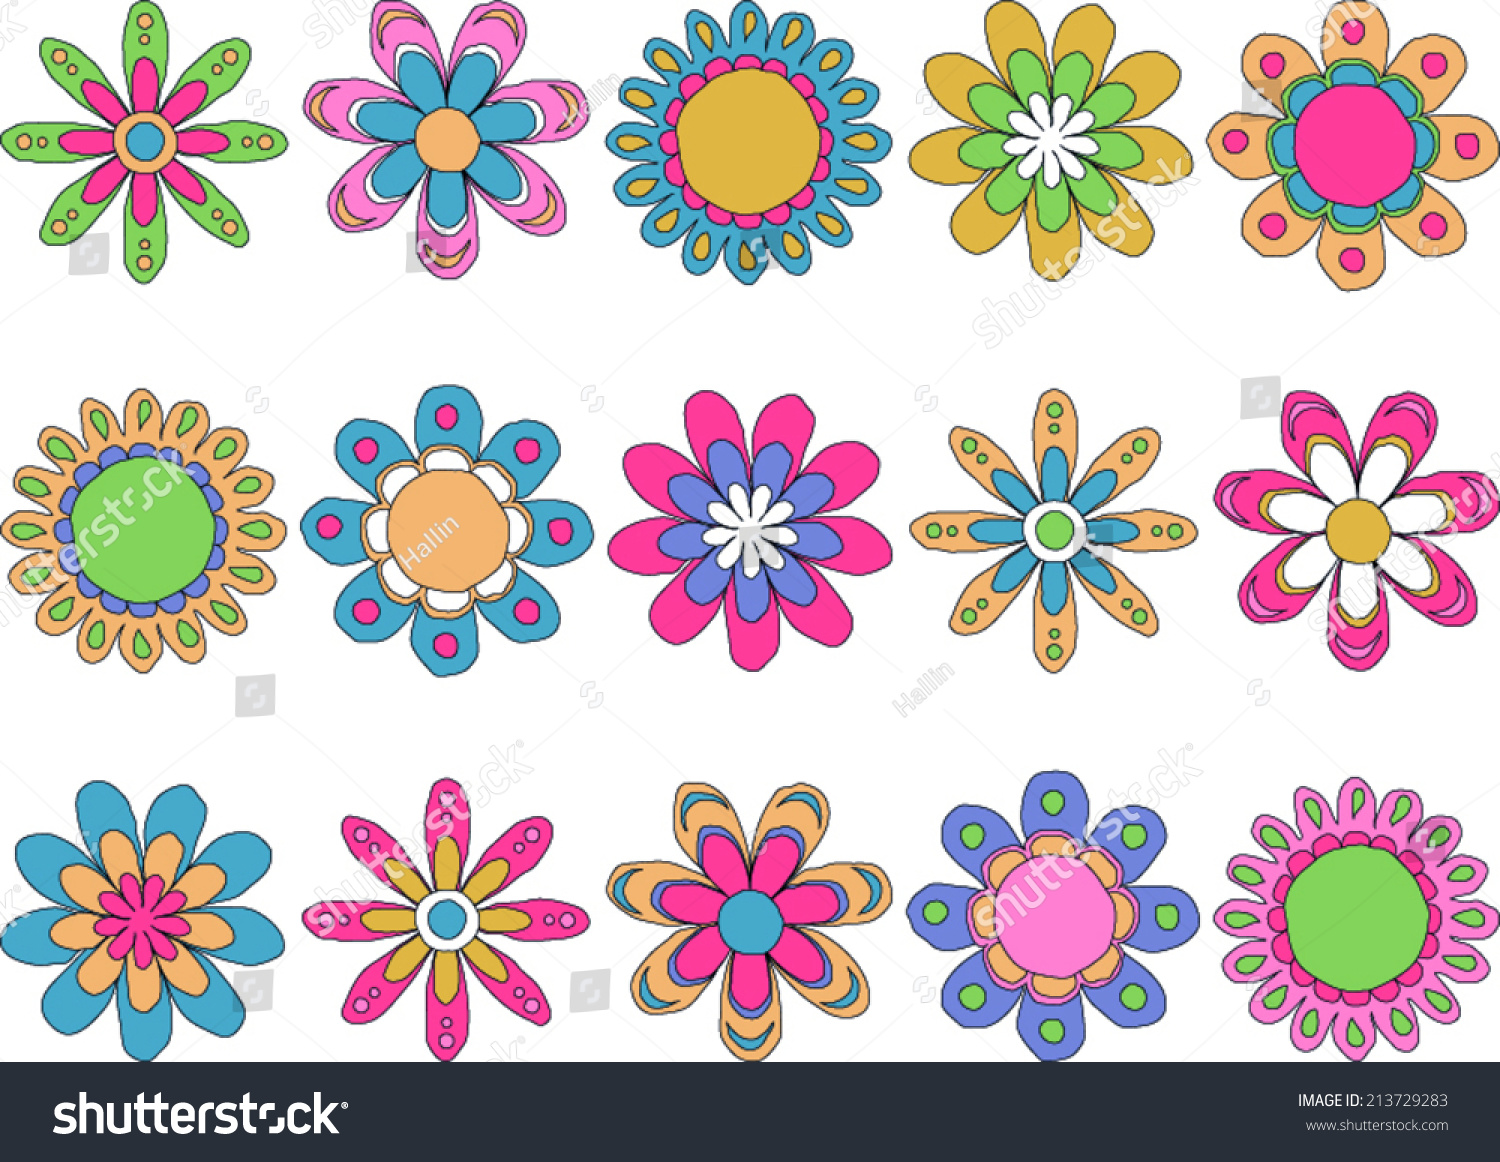 Colorful Flower Drawings Stock Vector (royalty Free) 213729283